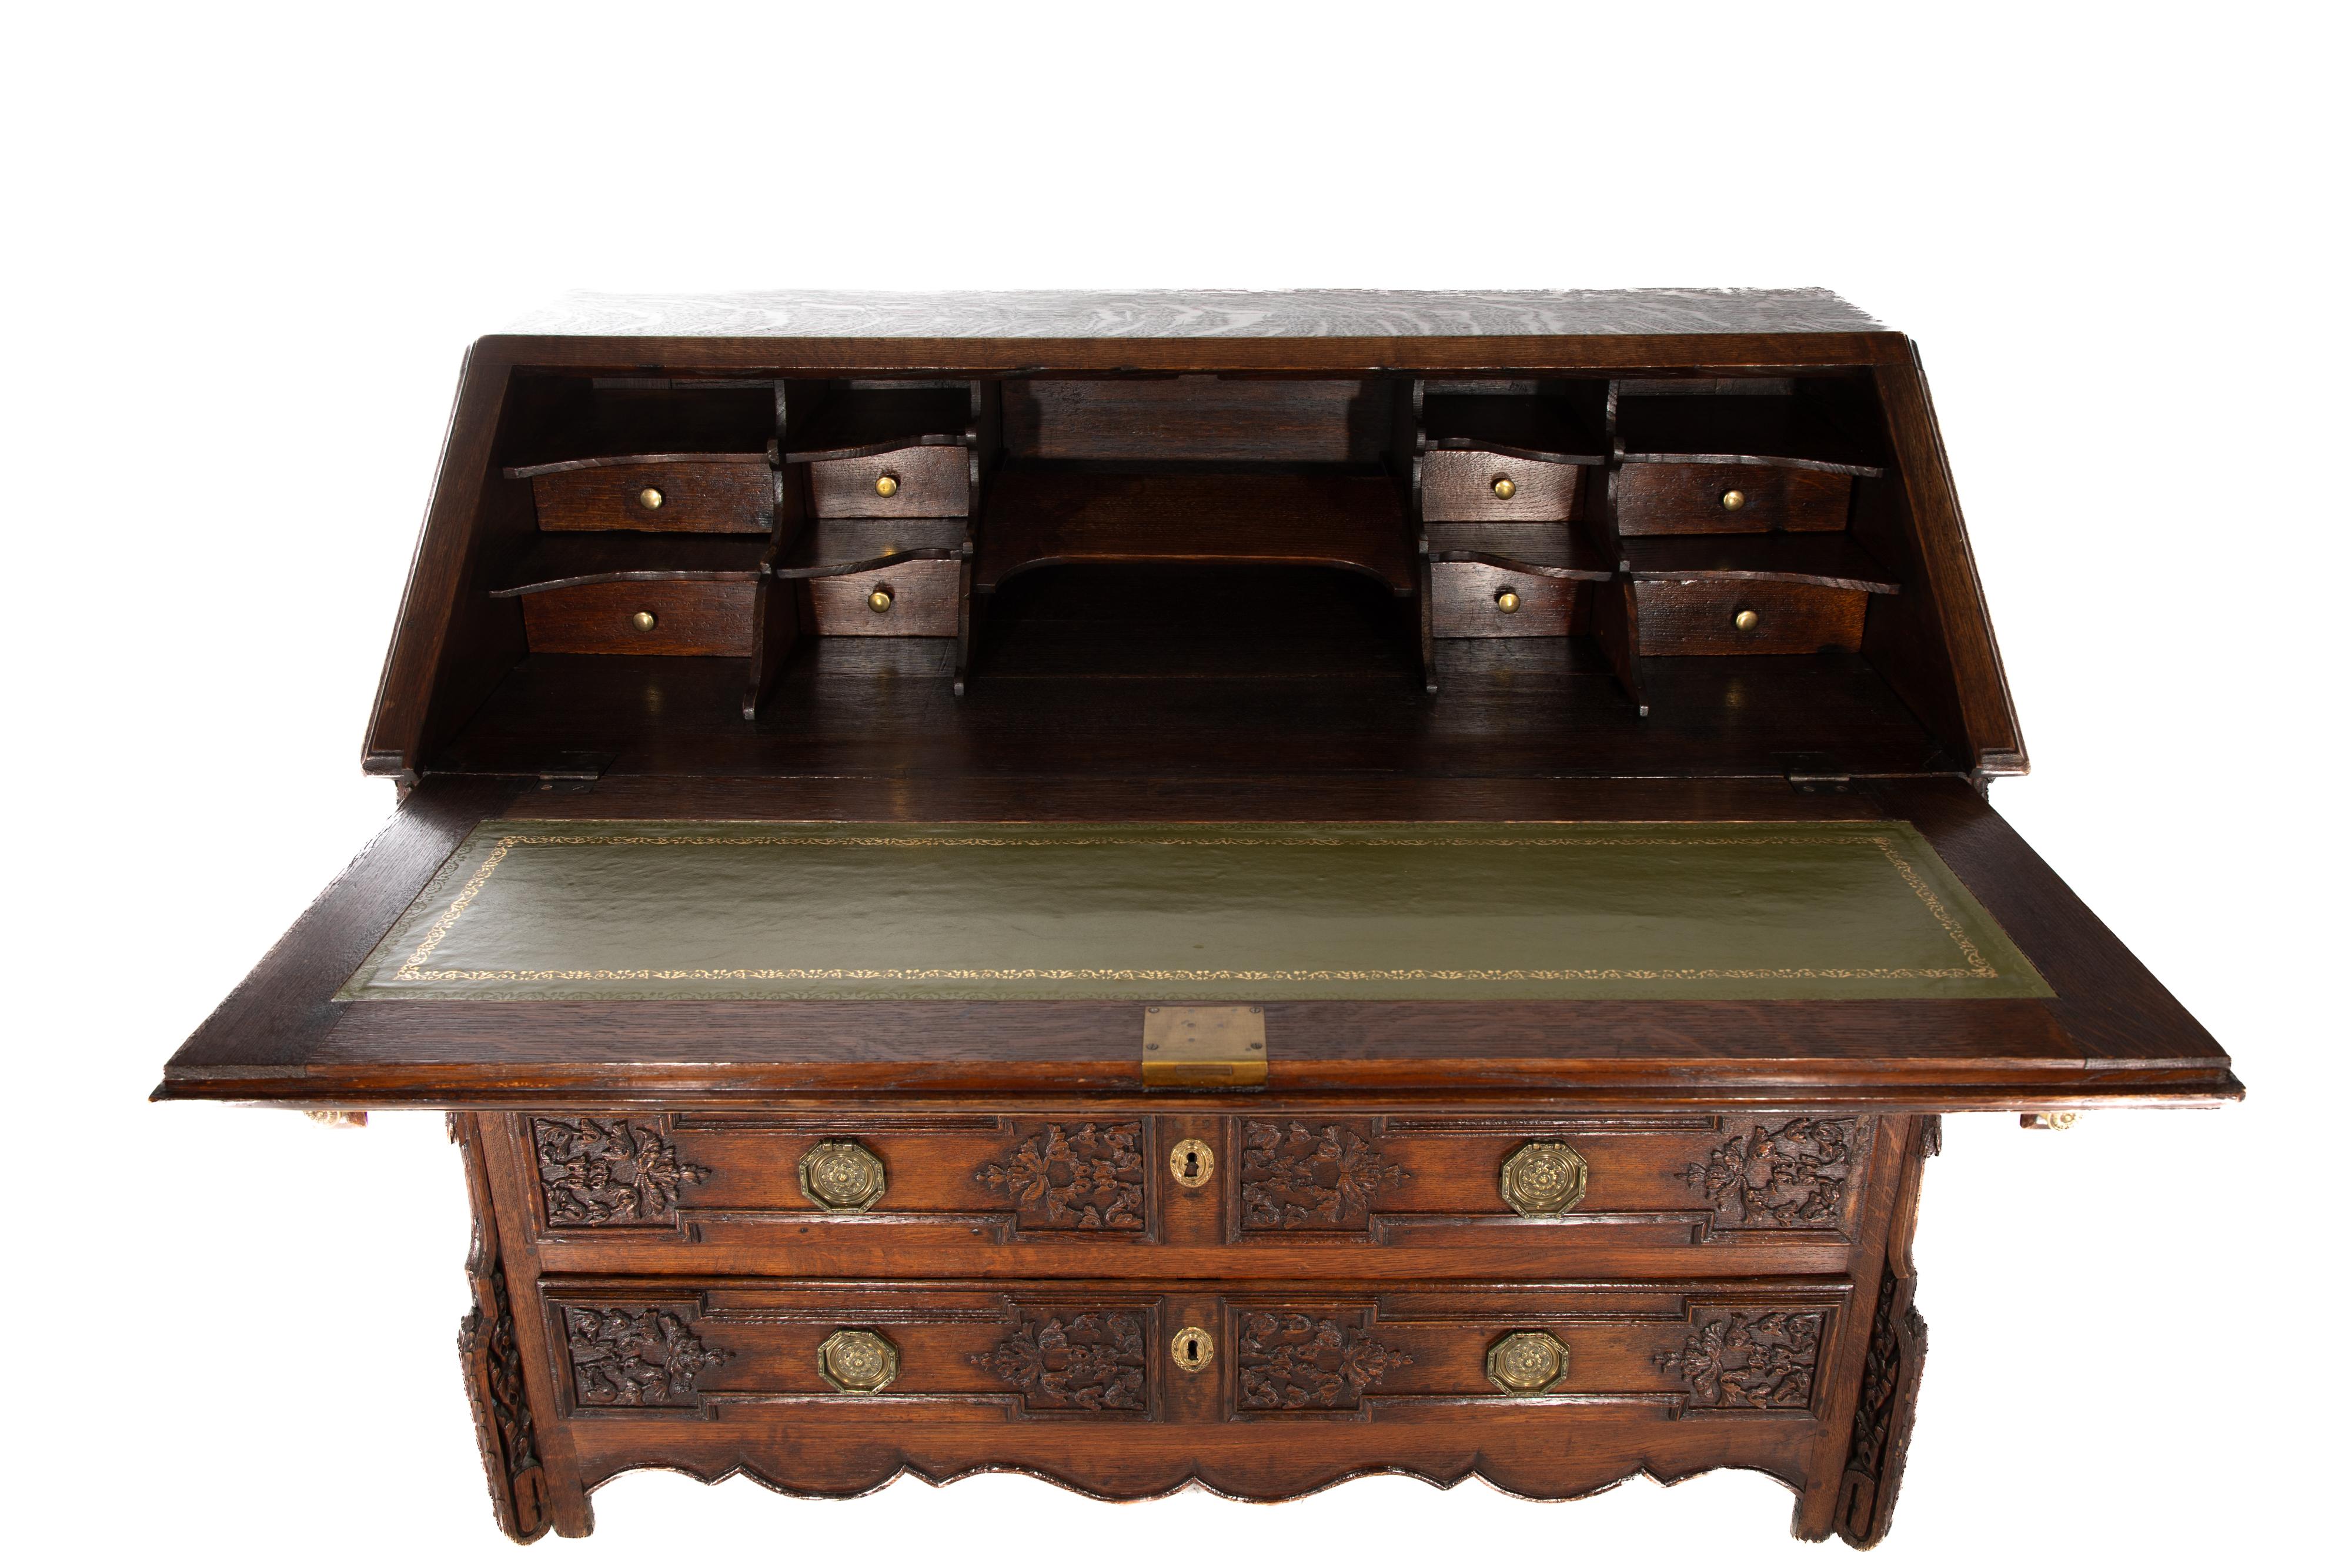 French oak drop front secretarie with green leather writing surface.
Circa 1780